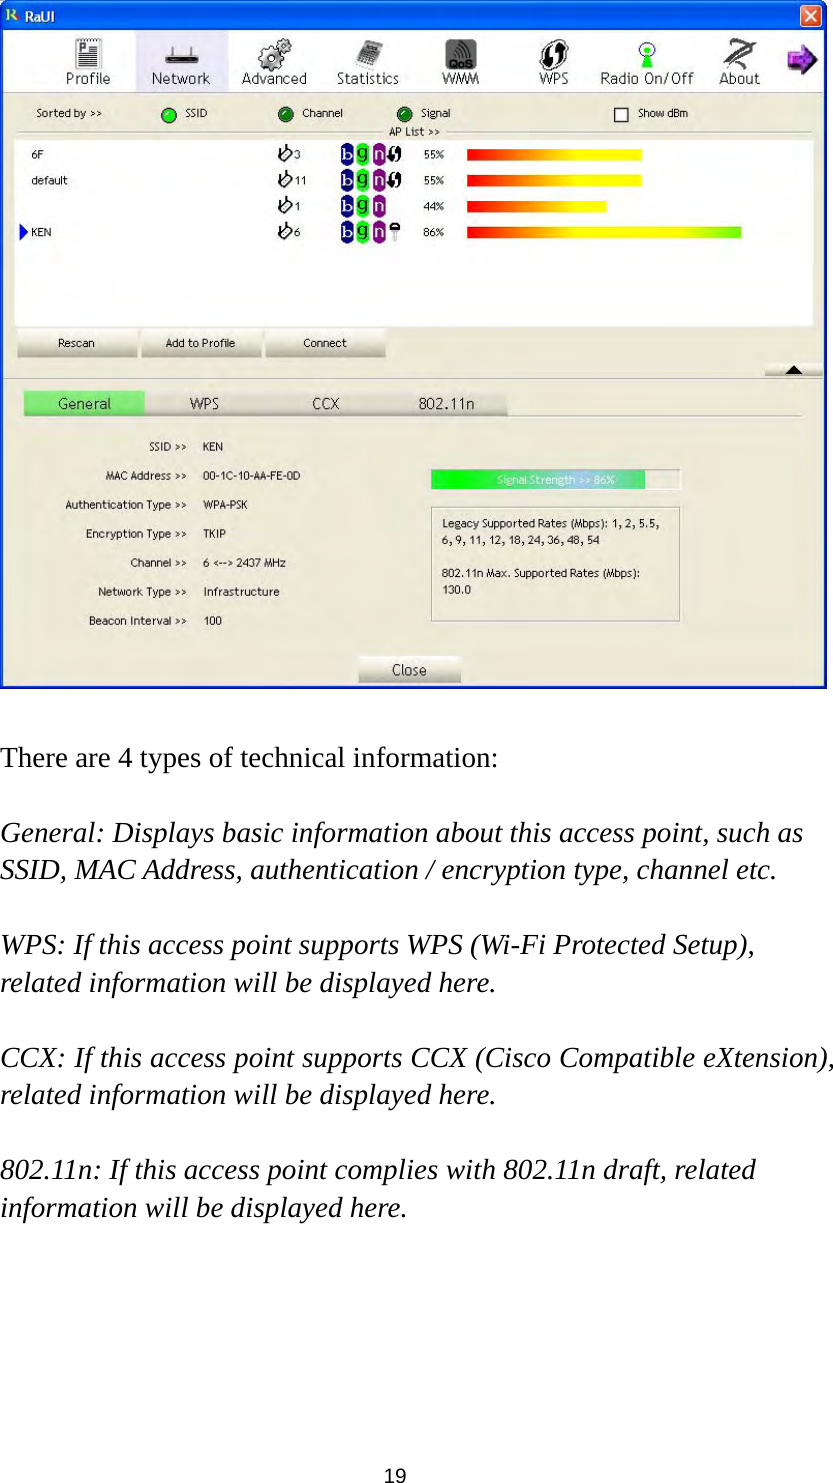  19   There are 4 types of technical information:    General: Displays basic information about this access point, such as SSID, MAC Address, authentication / encryption type, channel etc.  WPS: If this access point supports WPS (Wi-Fi Protected Setup), related information will be displayed here.  CCX: If this access point supports CCX (Cisco Compatible eXtension), related information will be displayed here.  802.11n: If this access point complies with 802.11n draft, related information will be displayed here.      